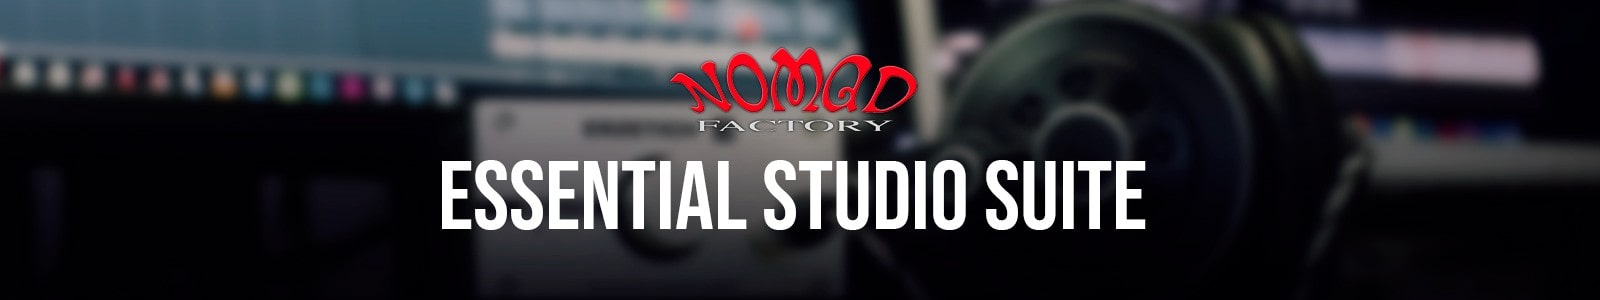 Essential Factory Studio by Nomad Factory